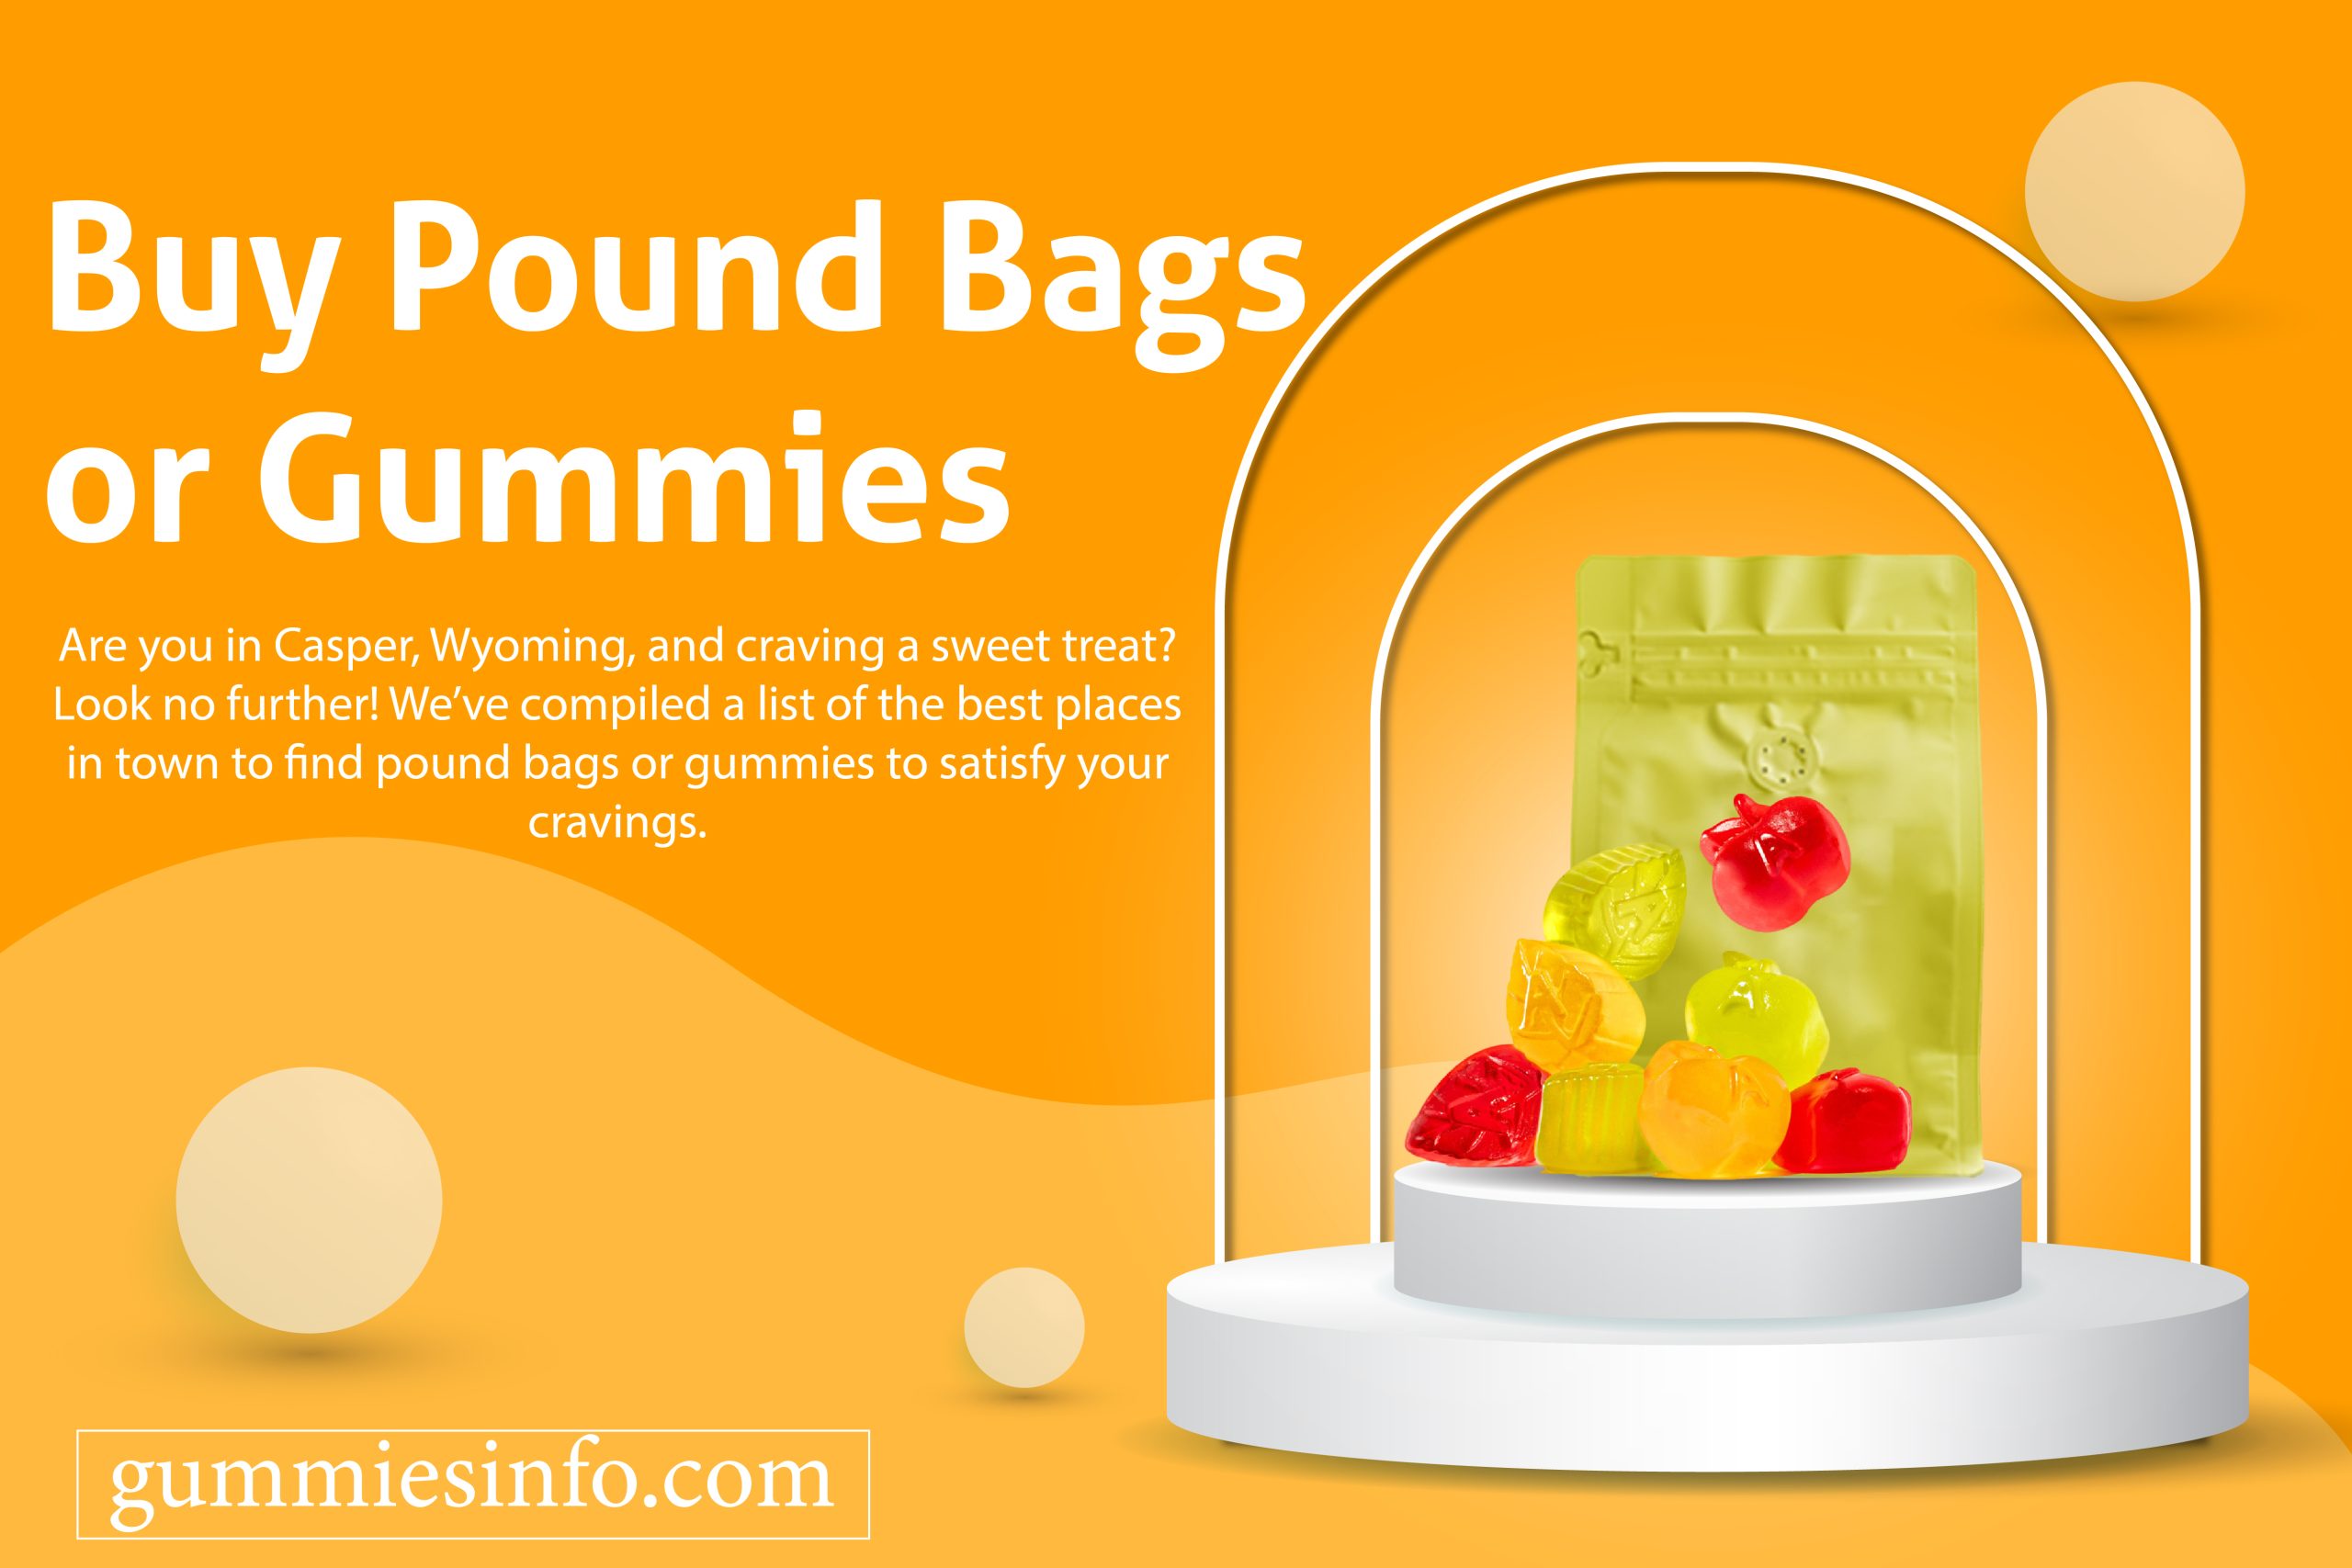 Buy Pound Bags or Gummies